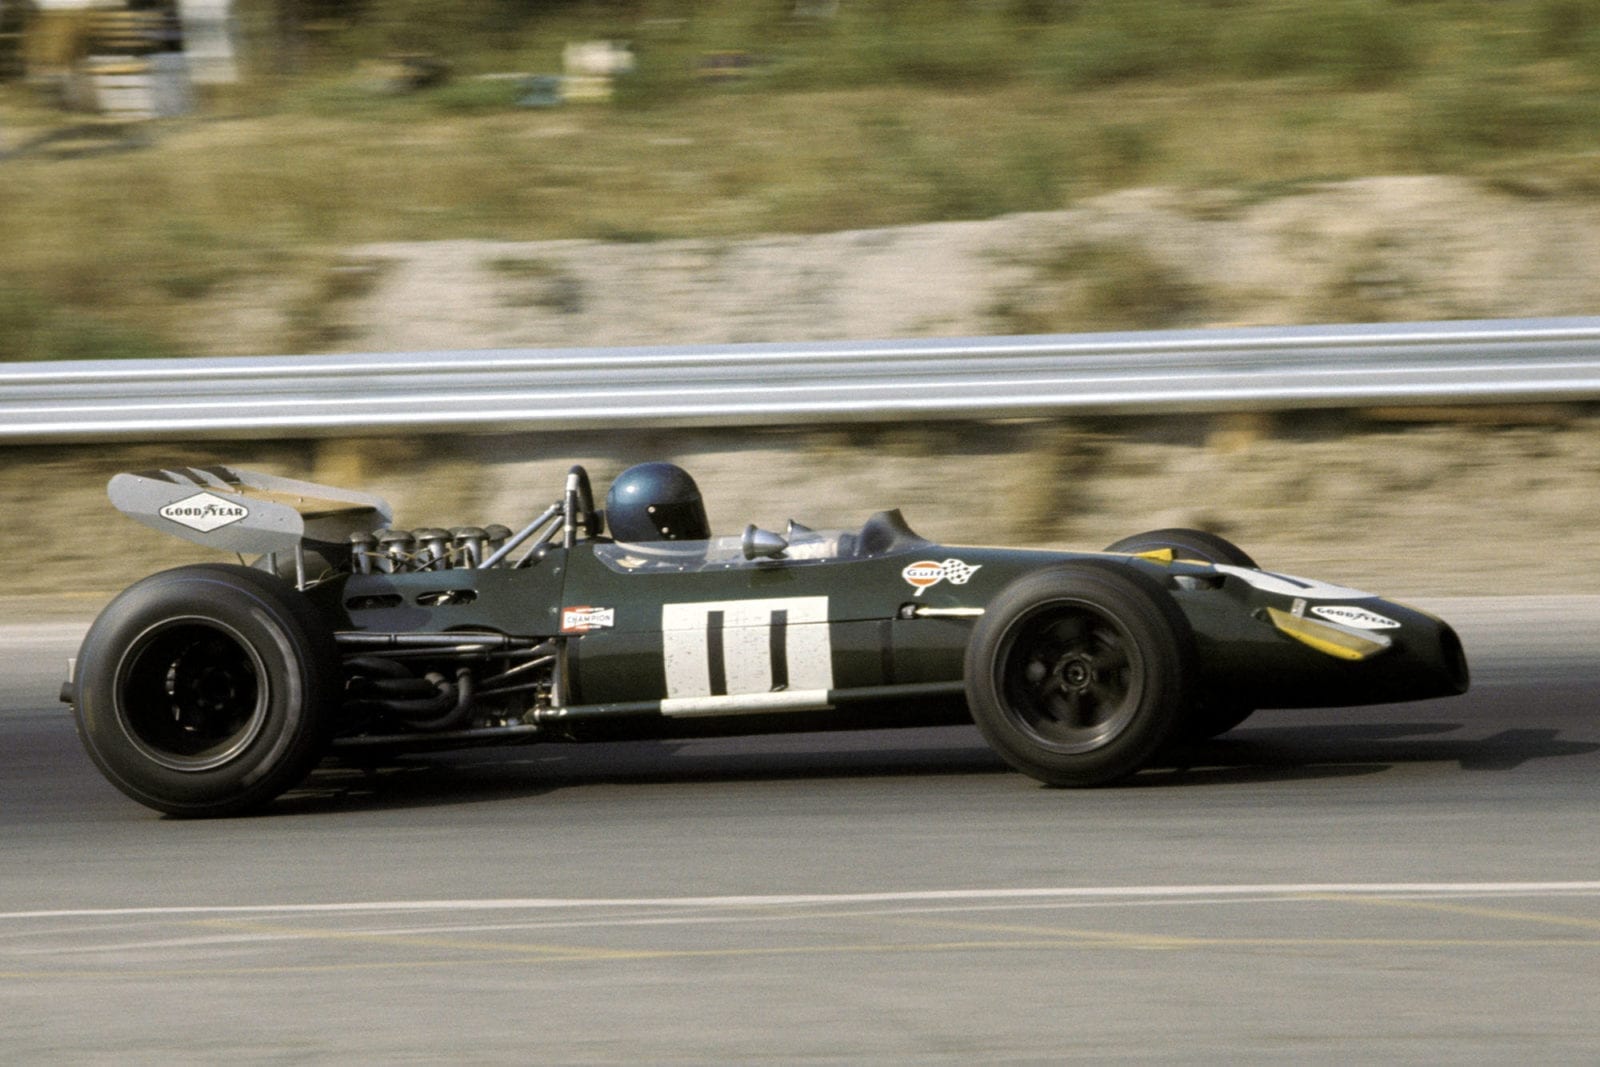 Jacky Ickx driving for Brabham at the 1969 Canadian Grand Prix